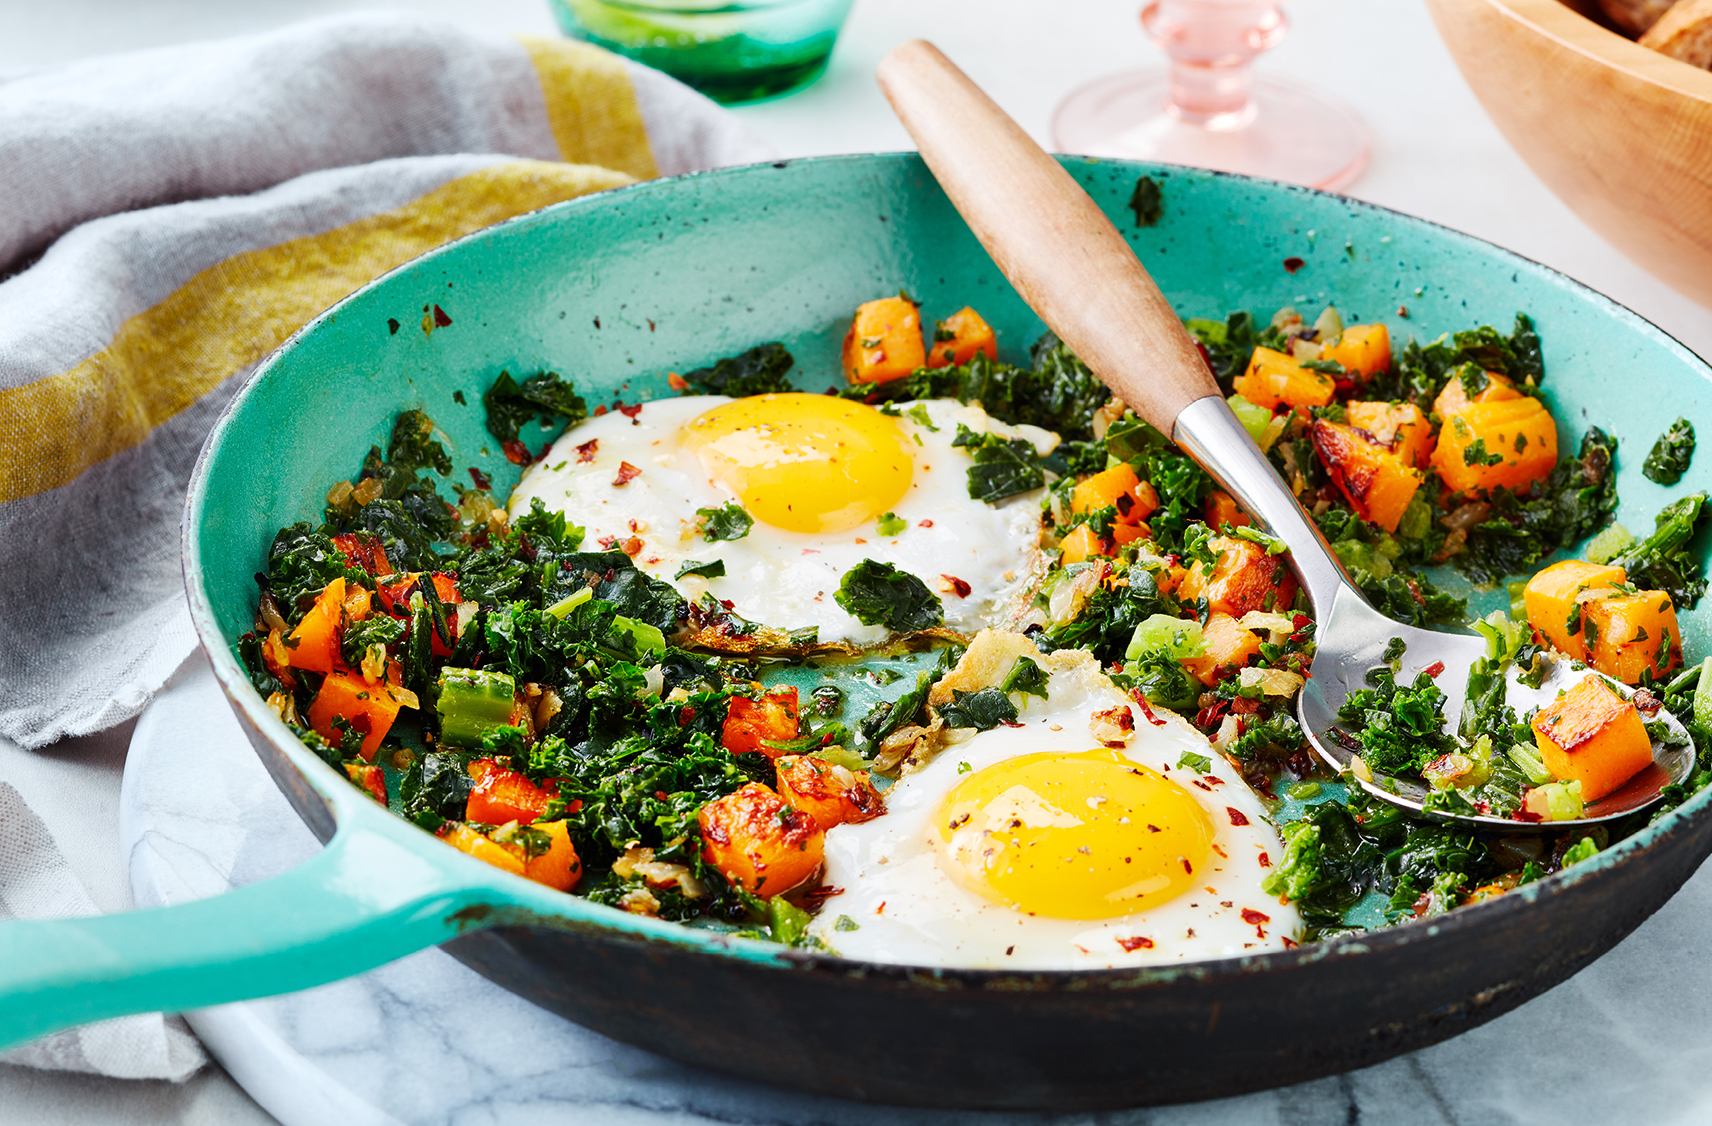 A spoon serves fried eggs over sautéed greens and cubed squash from a pan
